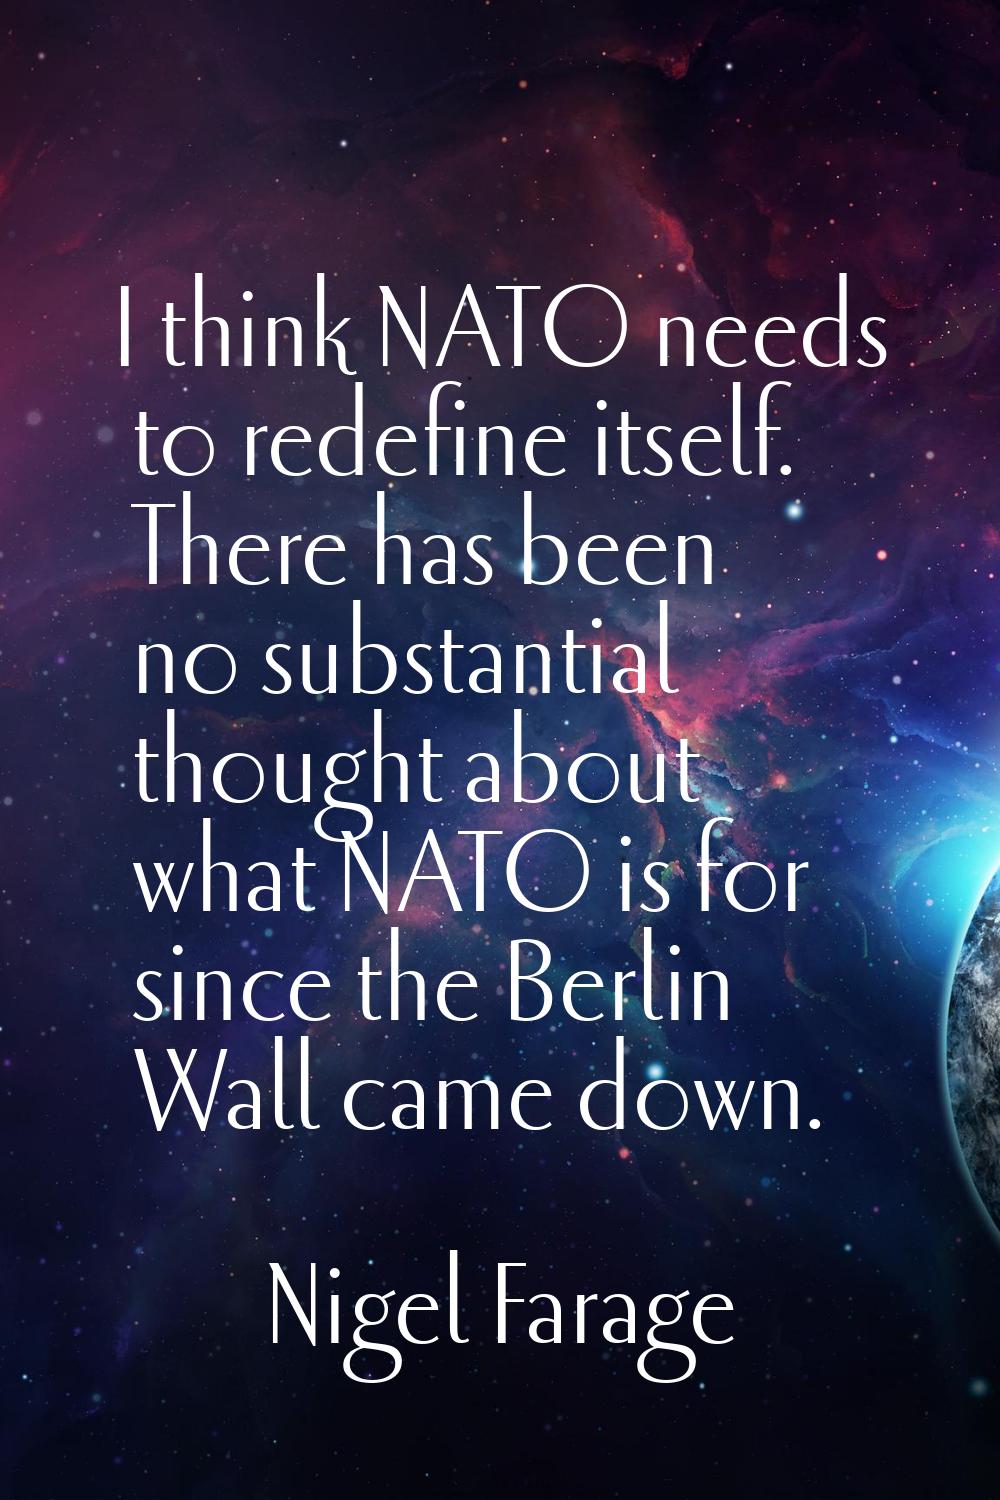 I think NATO needs to redefine itself. There has been no substantial thought about what NATO is for